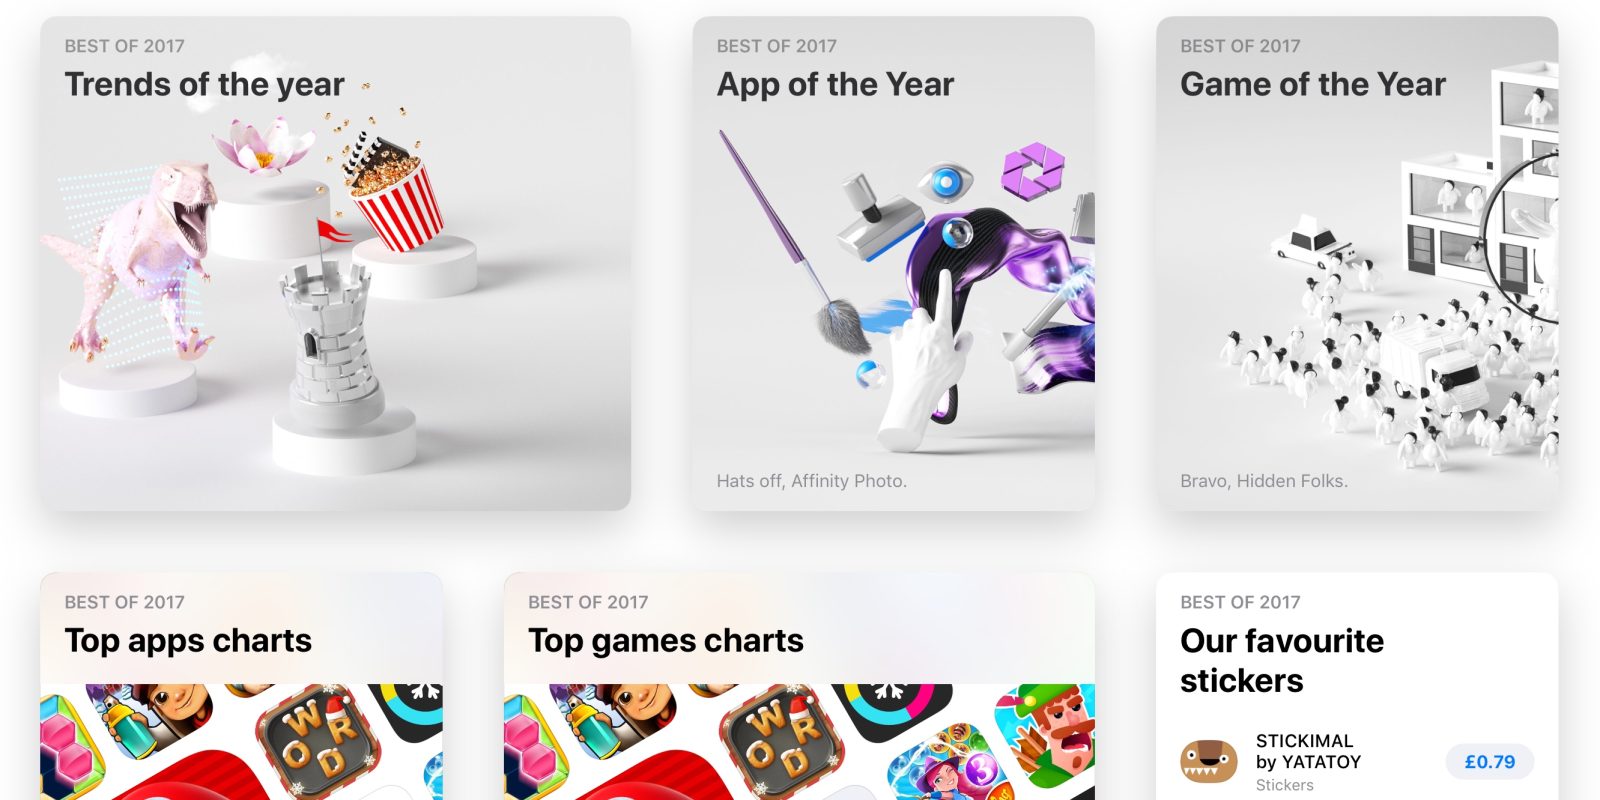 Every game of year. App of the year. Best app of the year. Топ чарт стикер.